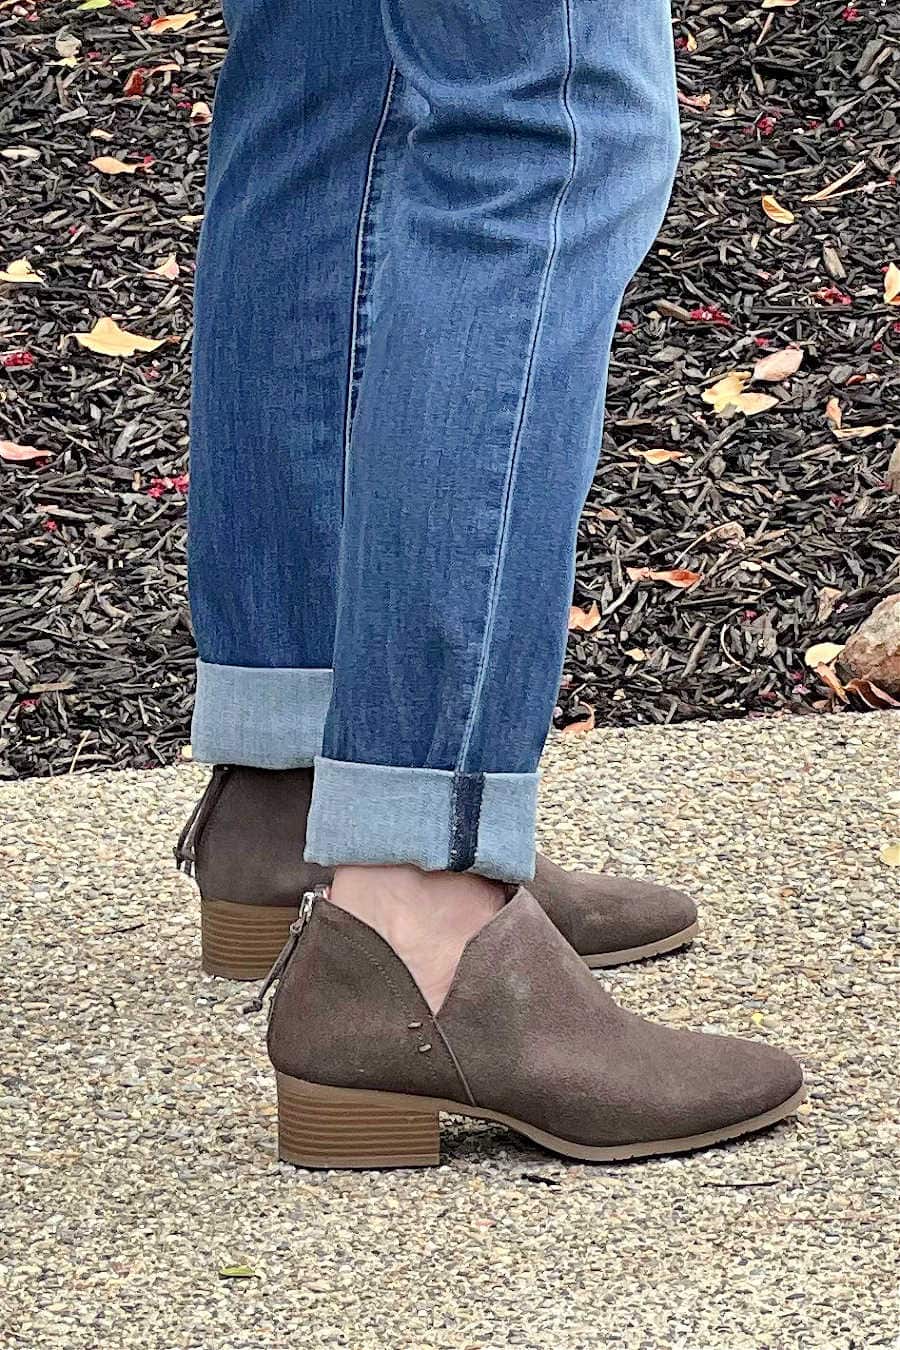 reaction kenneth cole booties in concrete color